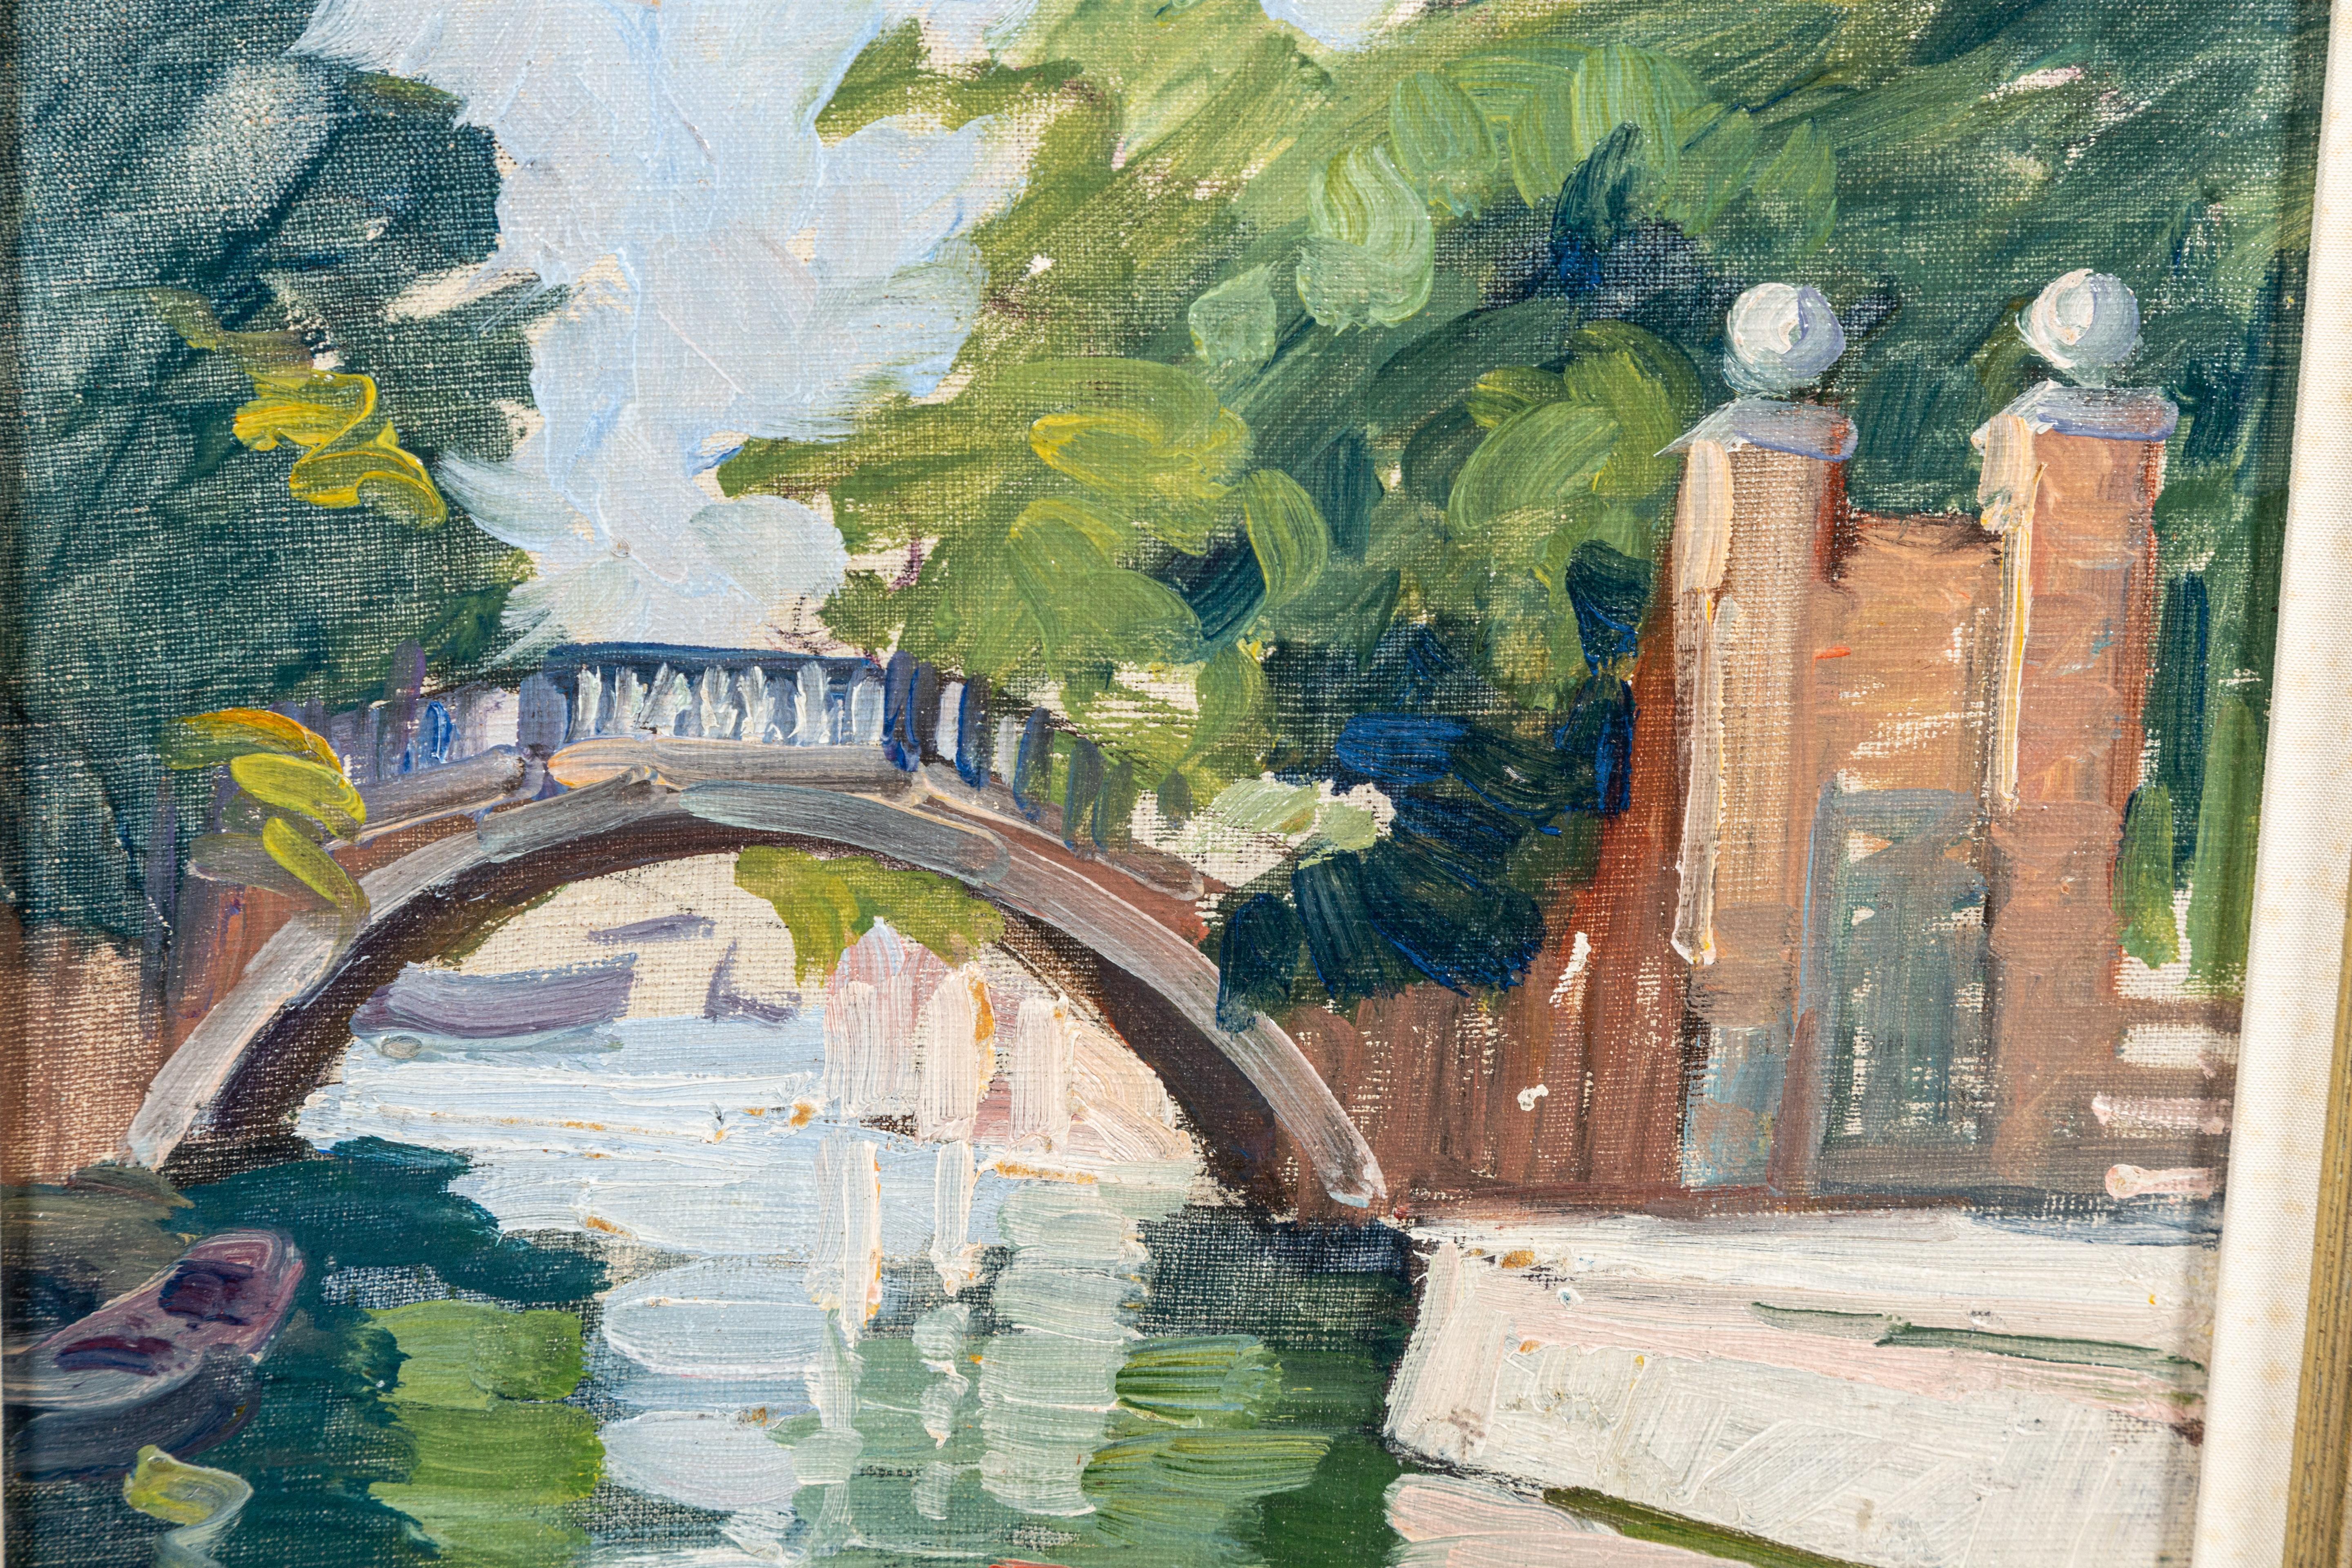 Pauline Palmer
Canal in Venice, circa 1910
Signed lower left
Oil on canvasboard
13 1/2 x 10 1/2 inches

Provenance:
Fred and Kay Krehbiel Collection

Pauline Palmer (1867 - 1938) was one of Chicago's early twentieth-century portrait and landscape